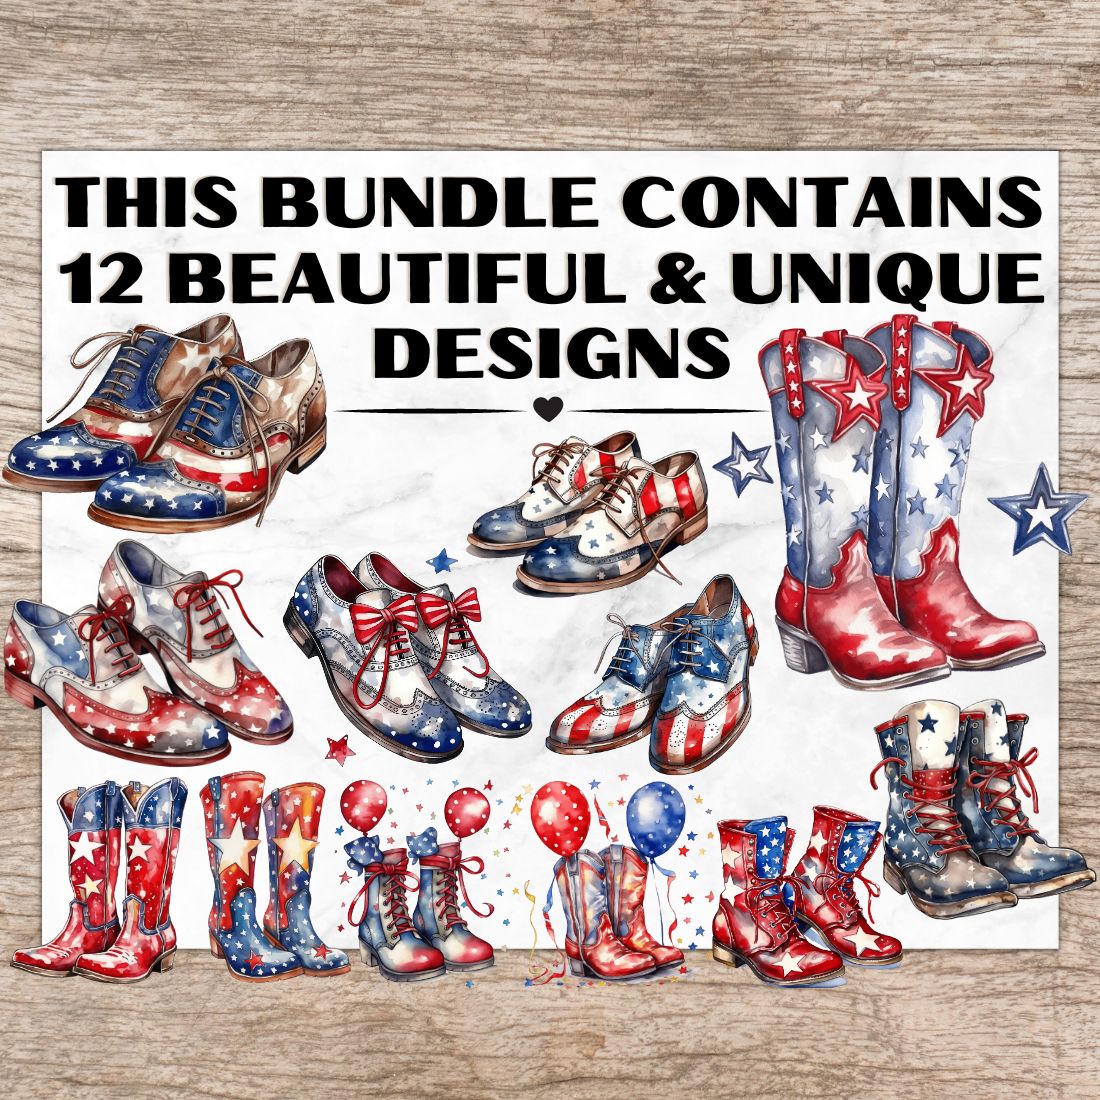 12 American Boots PNG, Watercolor Clipart, 4th of July, American Shoes, Transparent PNG, Digital Paper Craft, Illustrations, Watercolor Clipart For Scrapbook, Invitation, Wall Art, T-Shirt Design preview image.